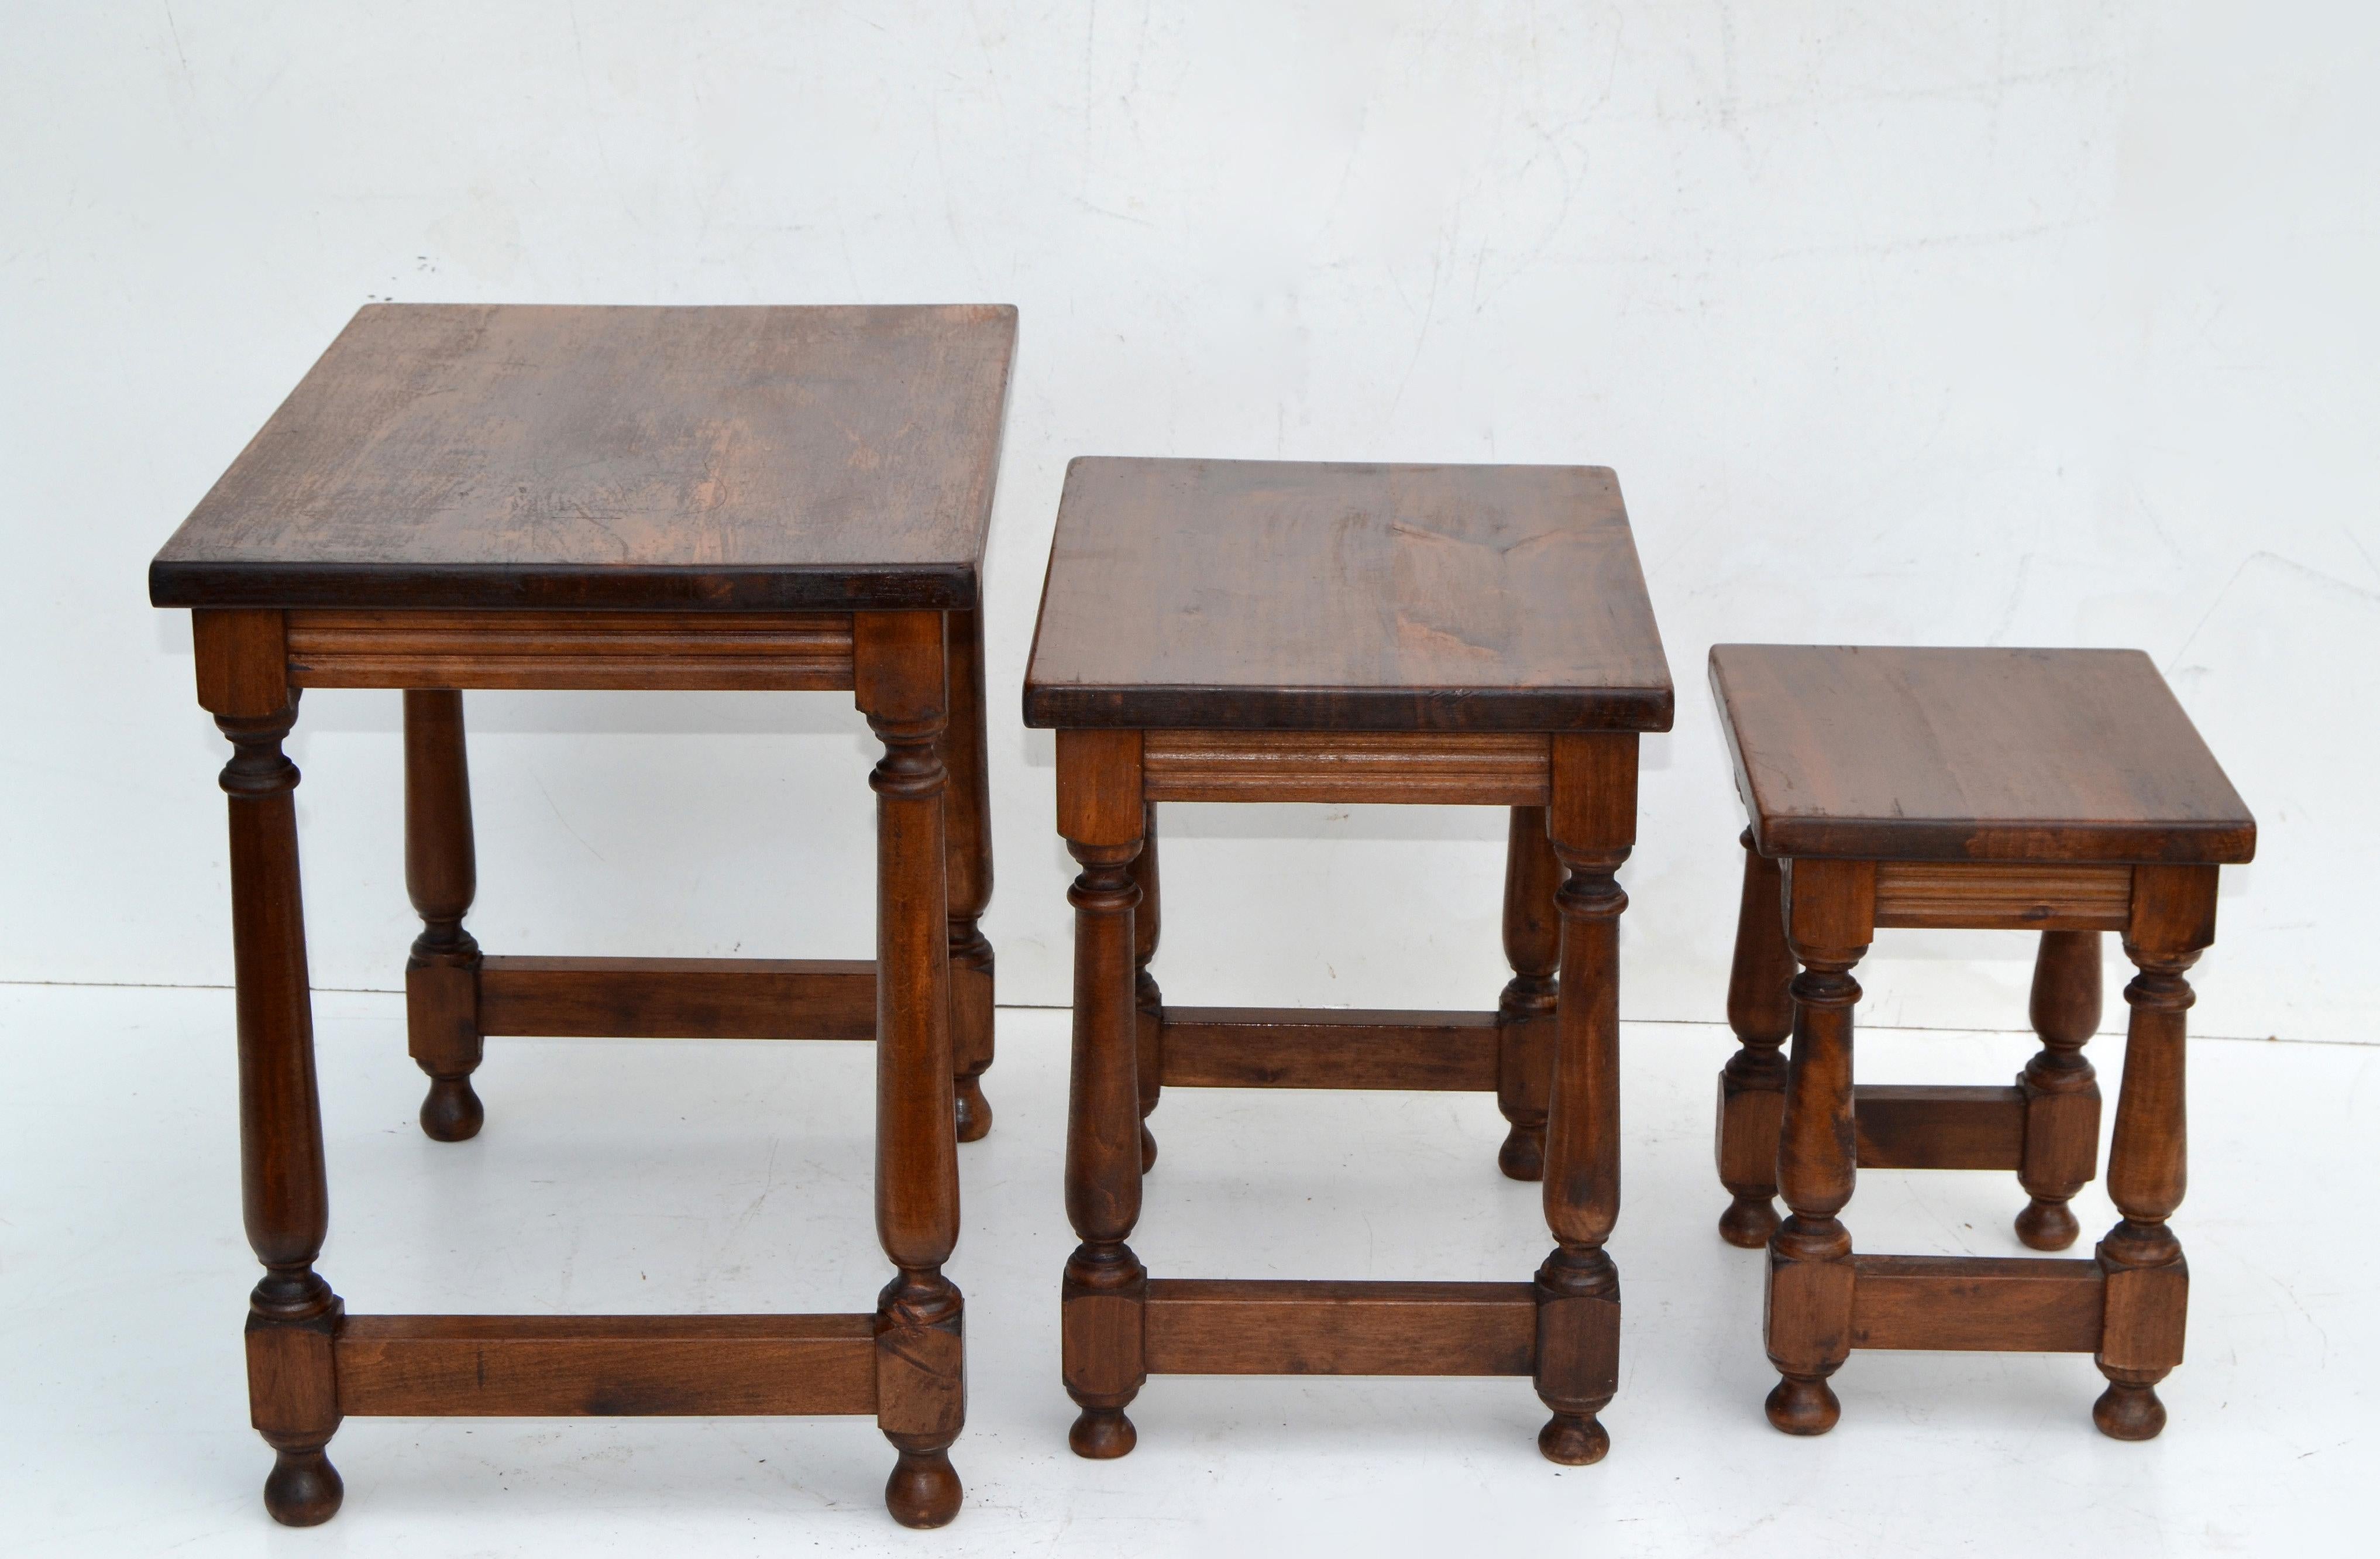 Antique Oakwood Set of 3 Nesting Tables Turned Legs, Stacking Tables, France In Good Condition For Sale In Miami, FL